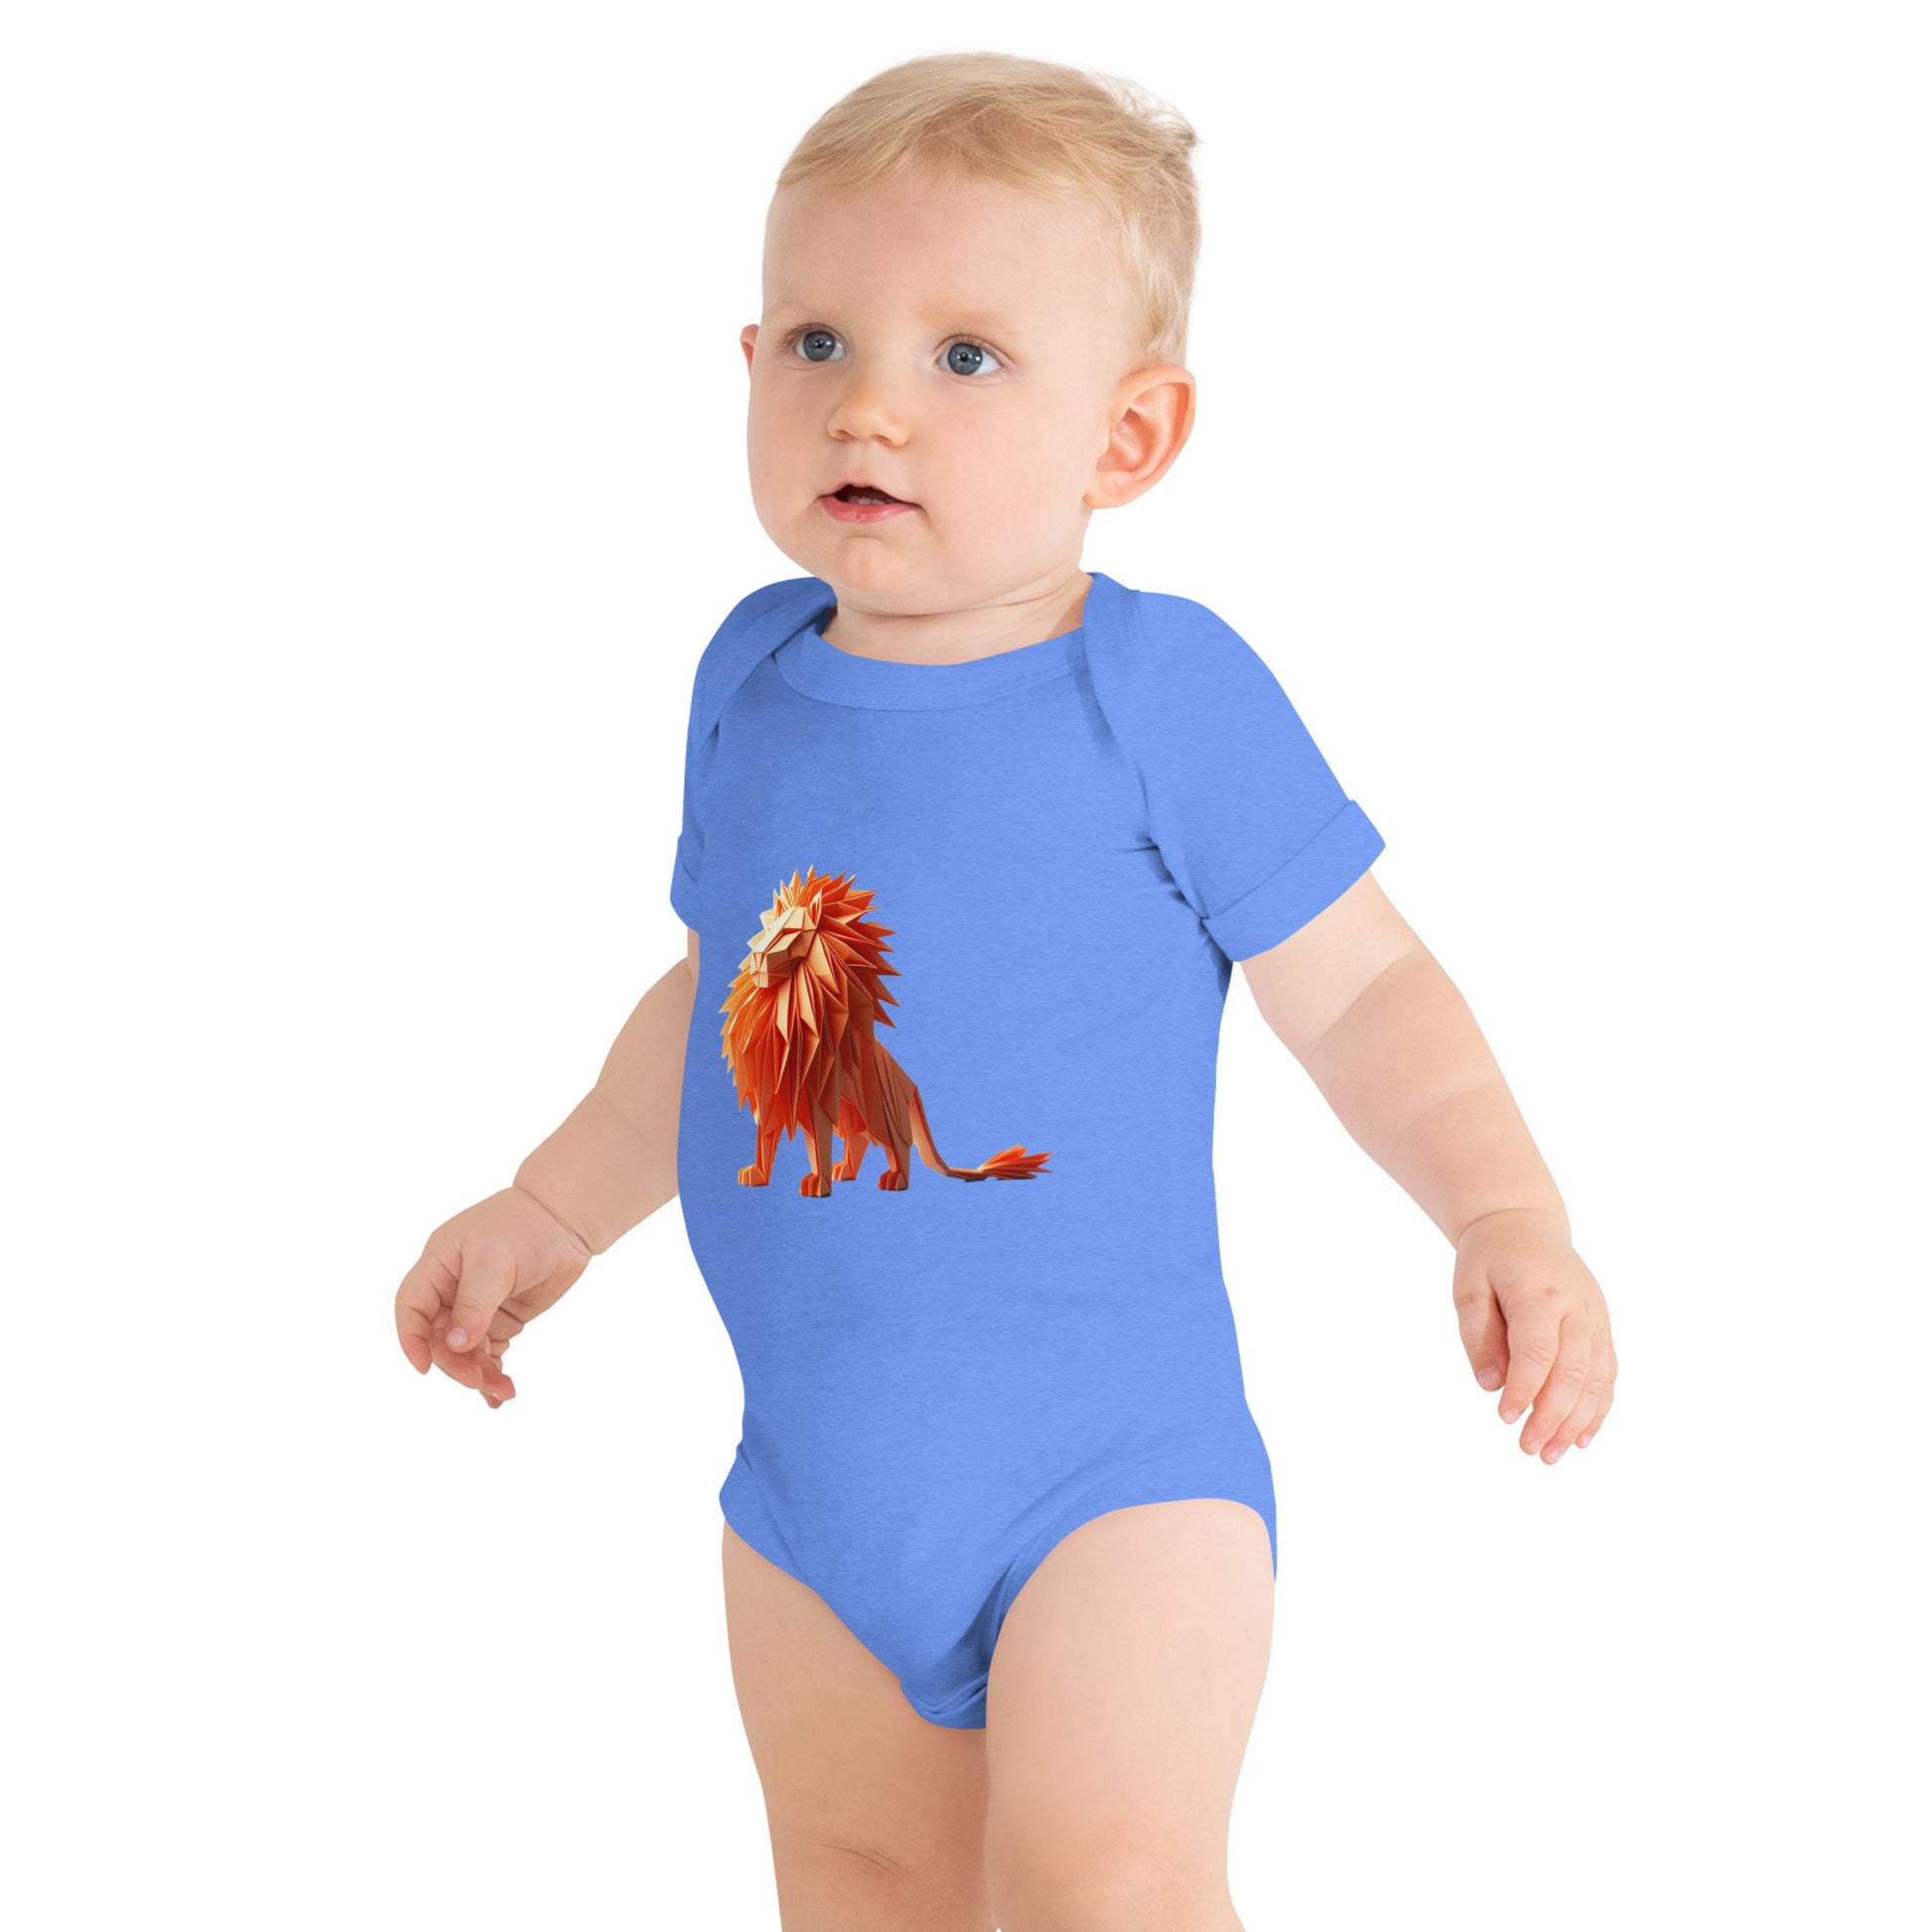 Baby with a columbia blue bodysuit with a print of a lion